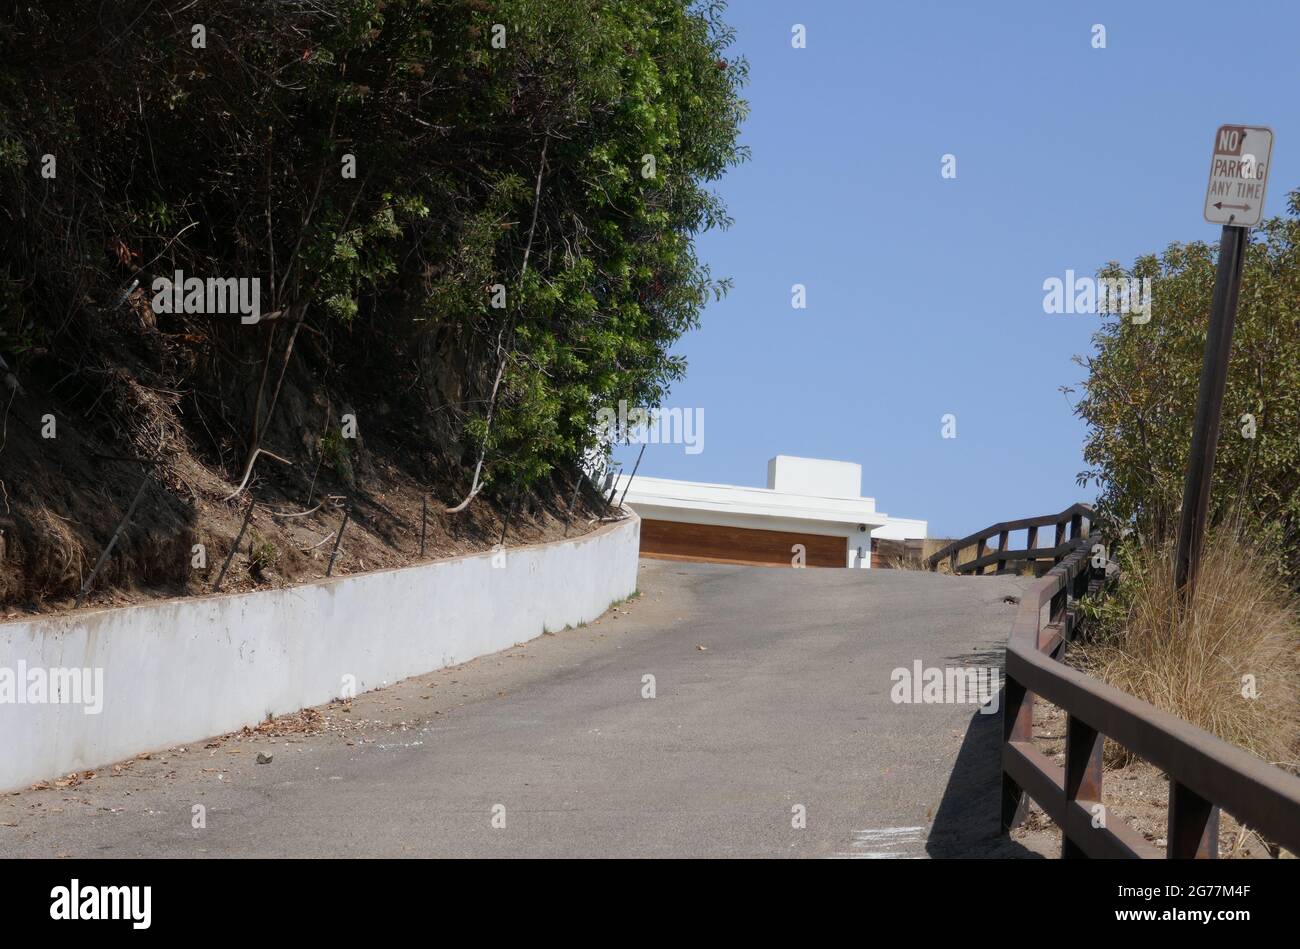 Los Angeles, California, USA 11th July 2021 A general view of atmosphere of Actress/Director Ida Lupino's Former Home/house on July 11, 2021 in Los Angeles, California, USA. Photo by Barry King/Alamy Stock Photo Stock Photo